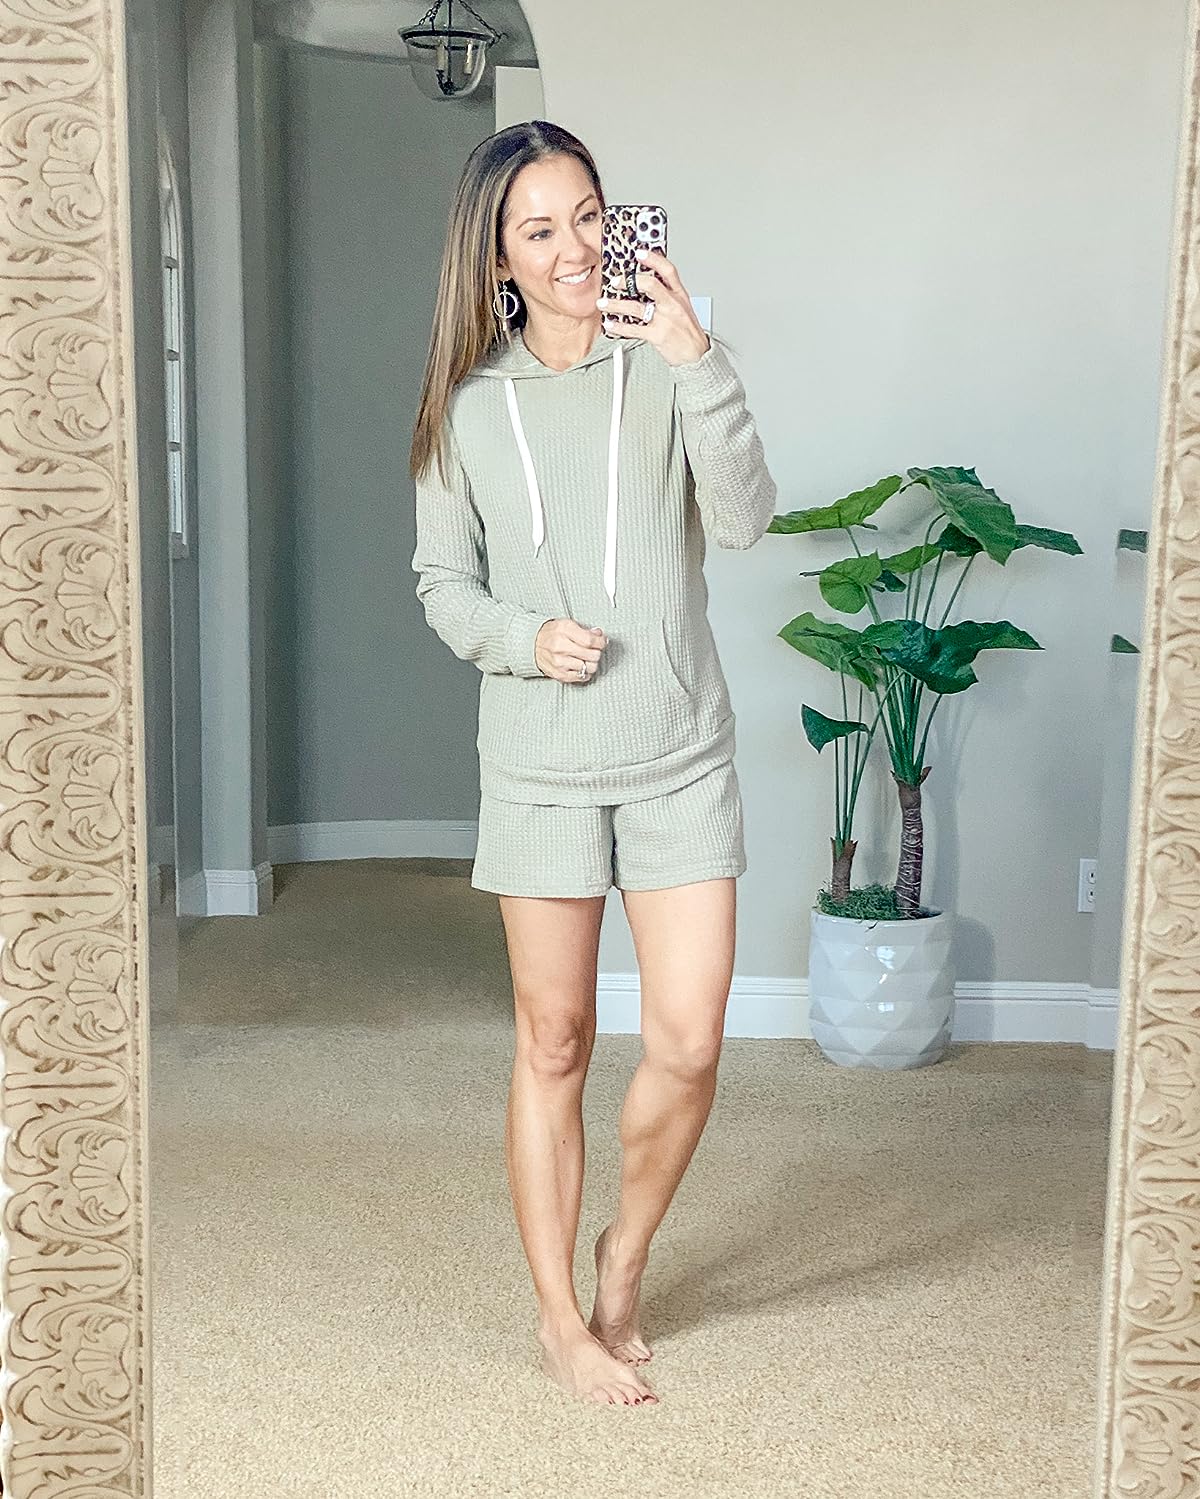 The Best Loungewear and Cozy Finds for this Fall | #best #loungewear #fall #cozy #finds #autumn #amazon #twopiece #sweater #hoodie #shorts #relax #lounge #couch #livingroom #bedroom